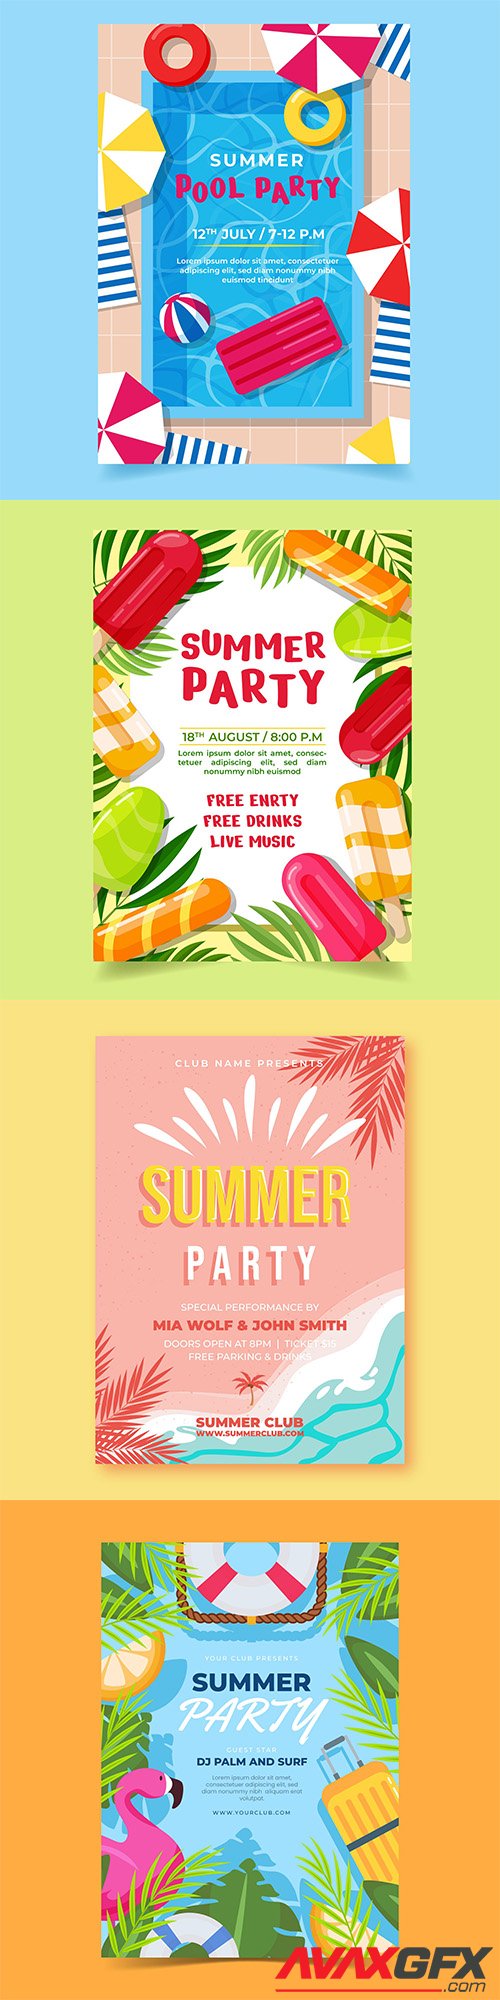 Summer party vertical poster template